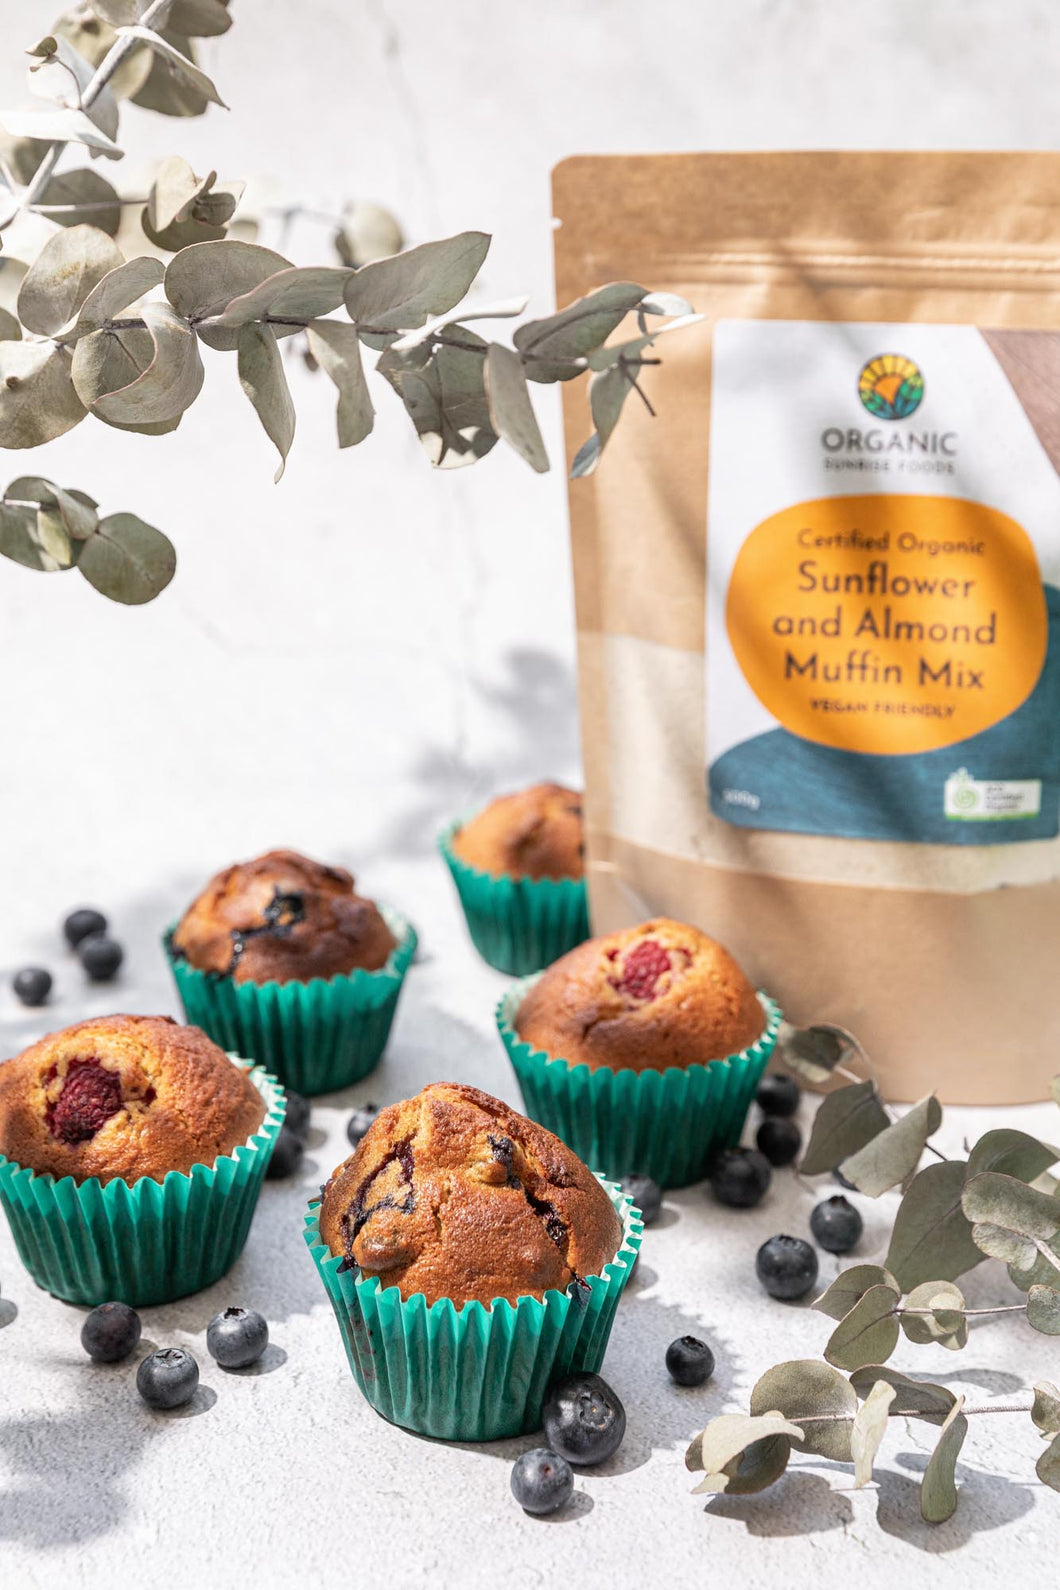 Sunflower and Almond Muffin Mix